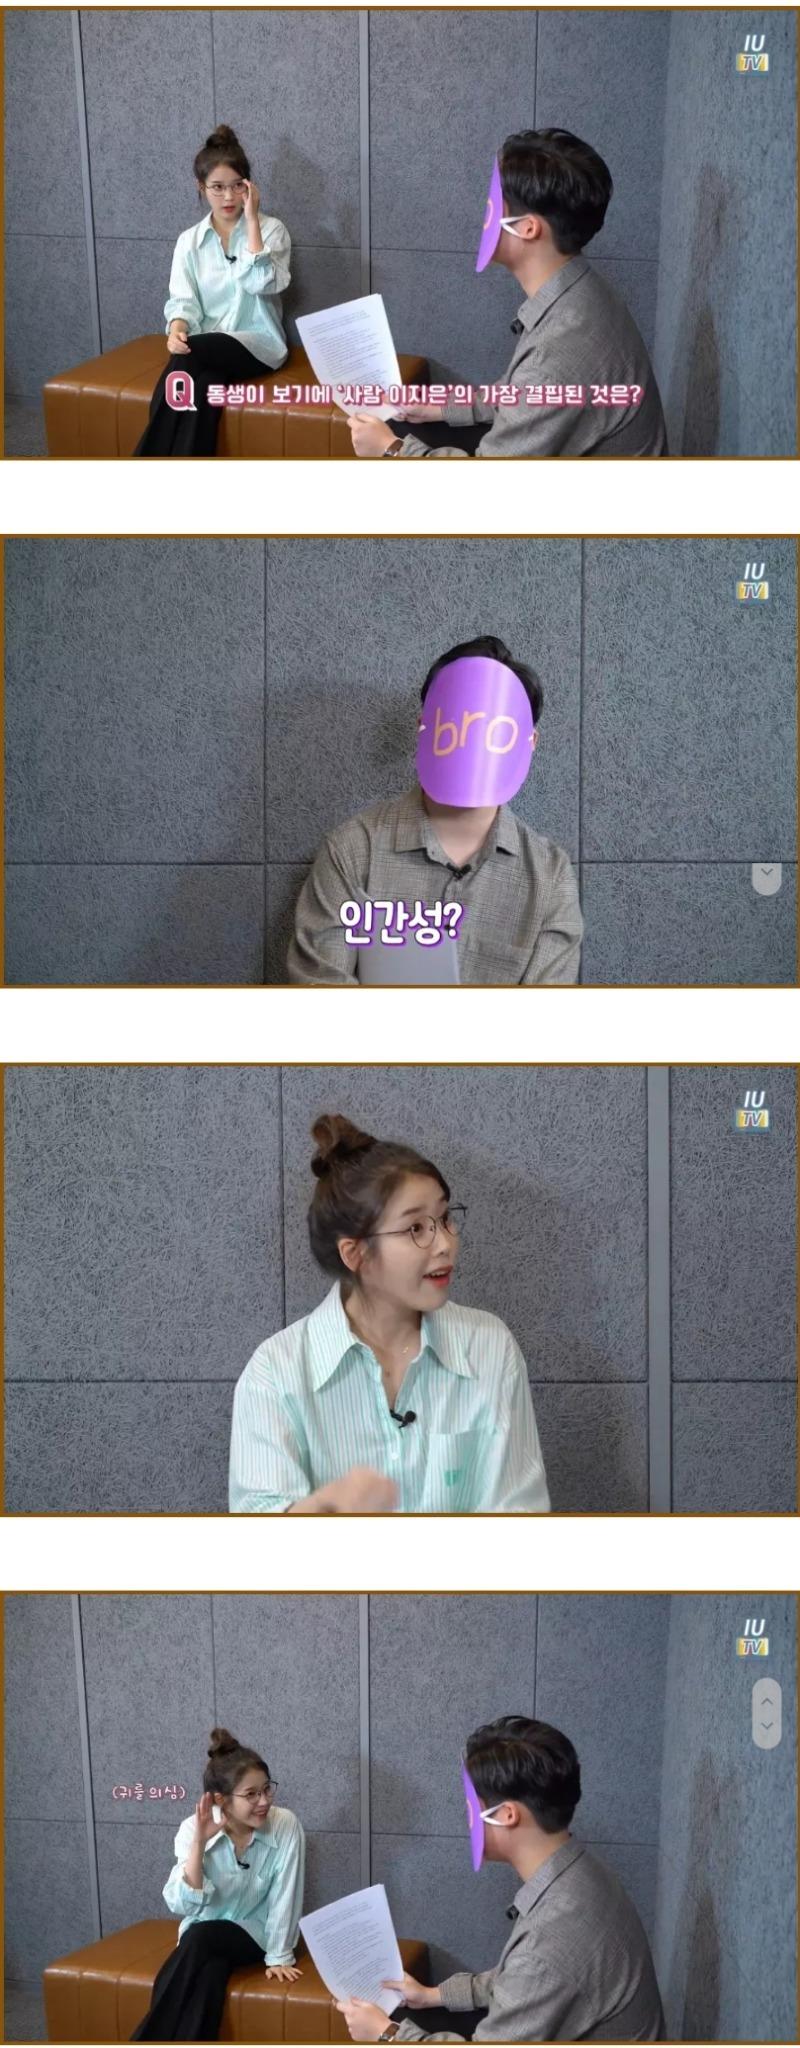 IU and her younger brother certifying their real siblings.